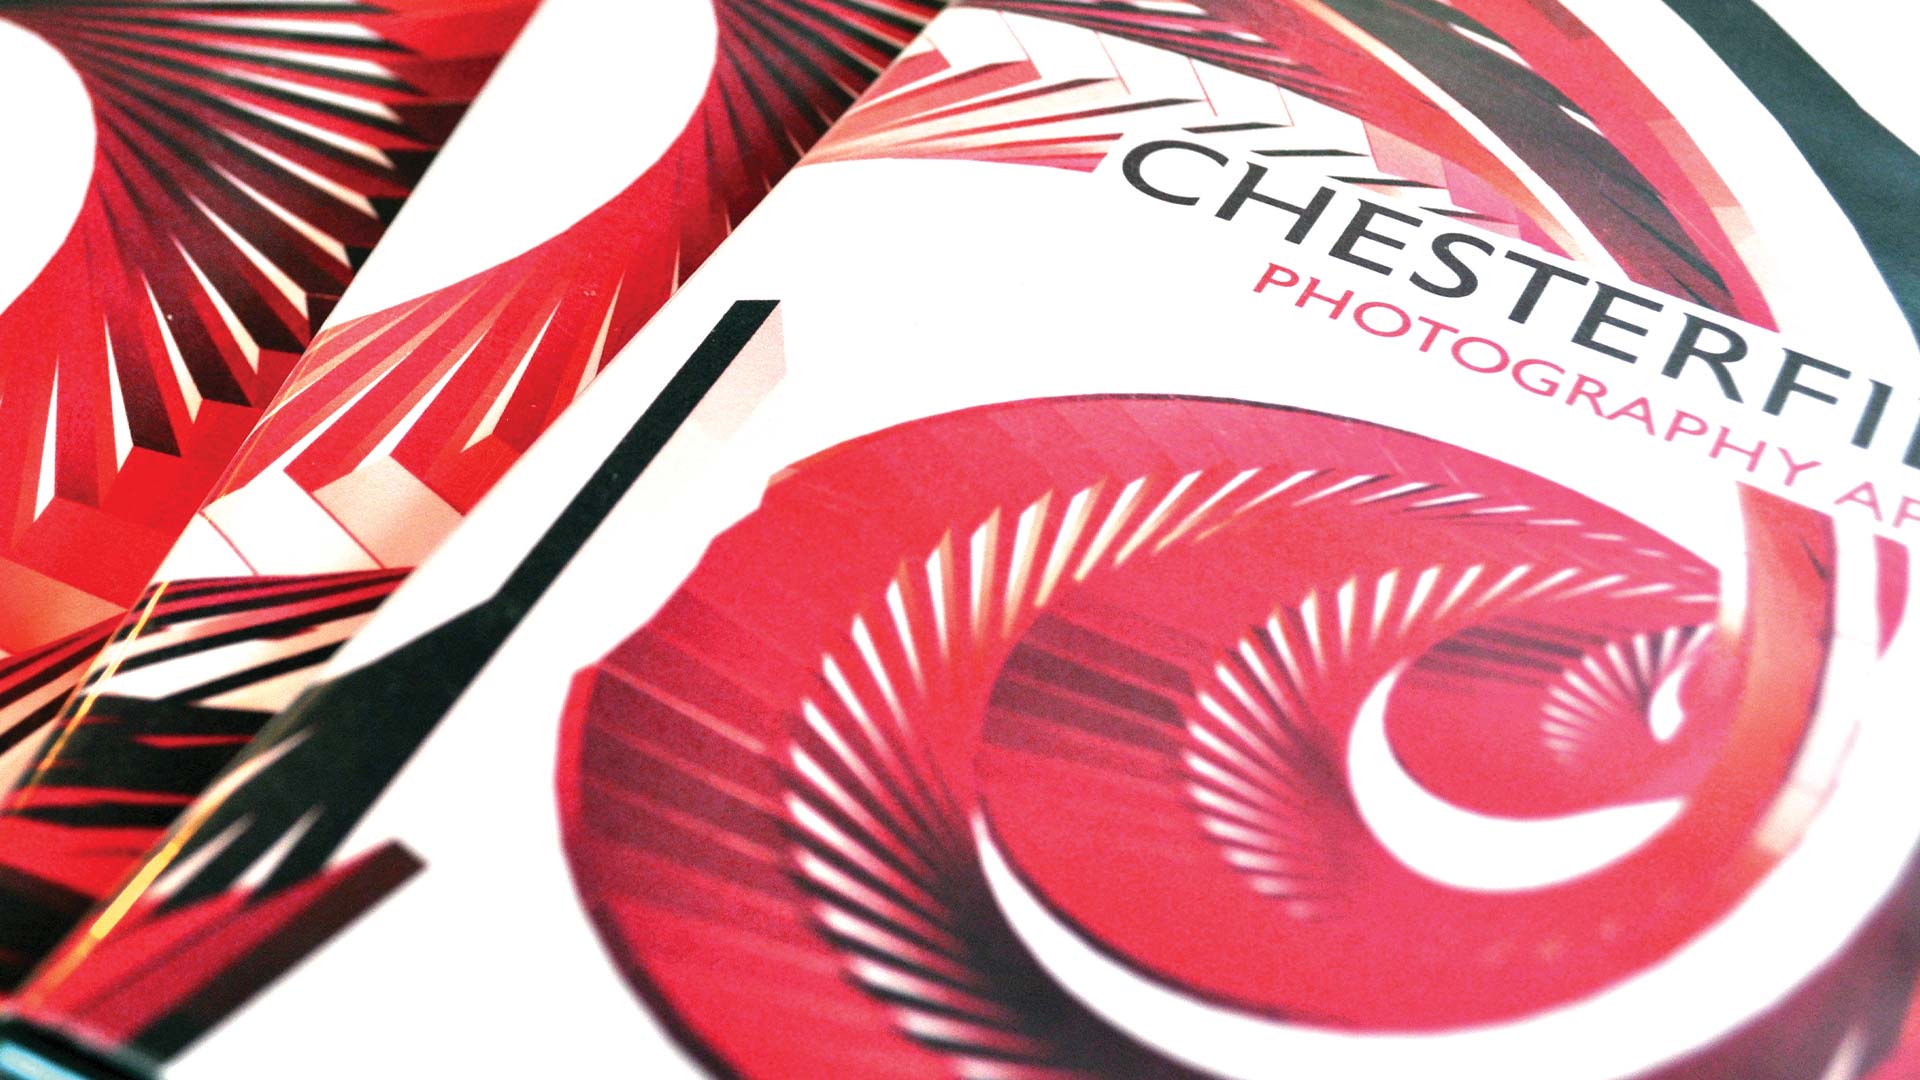 Peter Anderson Studio Chesterfield Place Branding 05